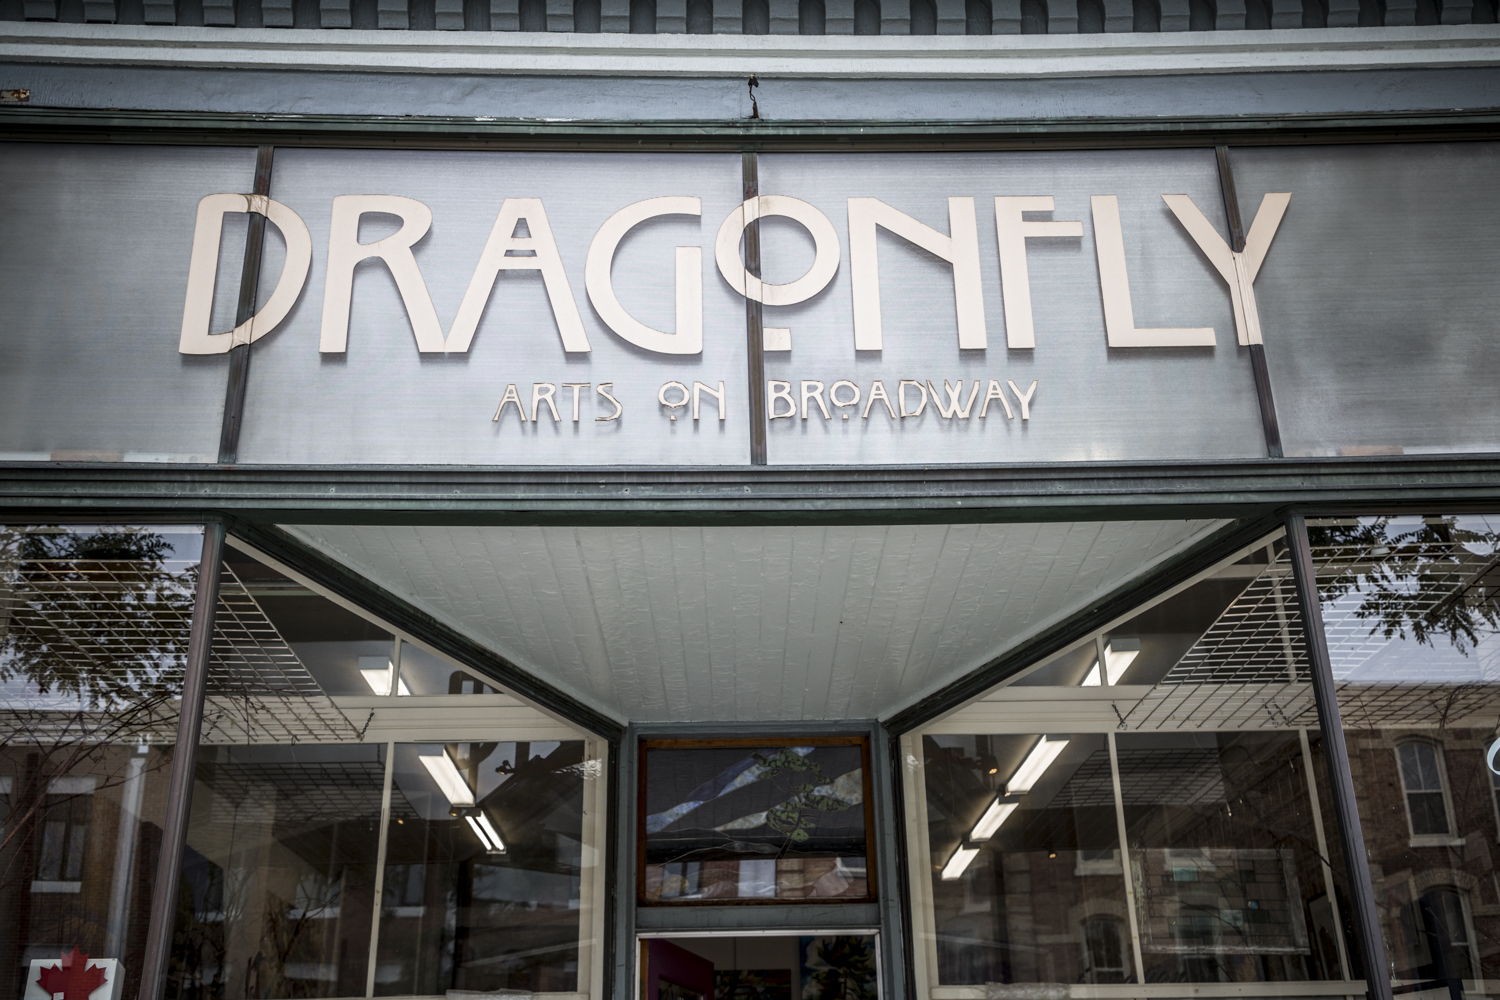 Dragonfly Arts on Broadway storefront in Dufferin County.